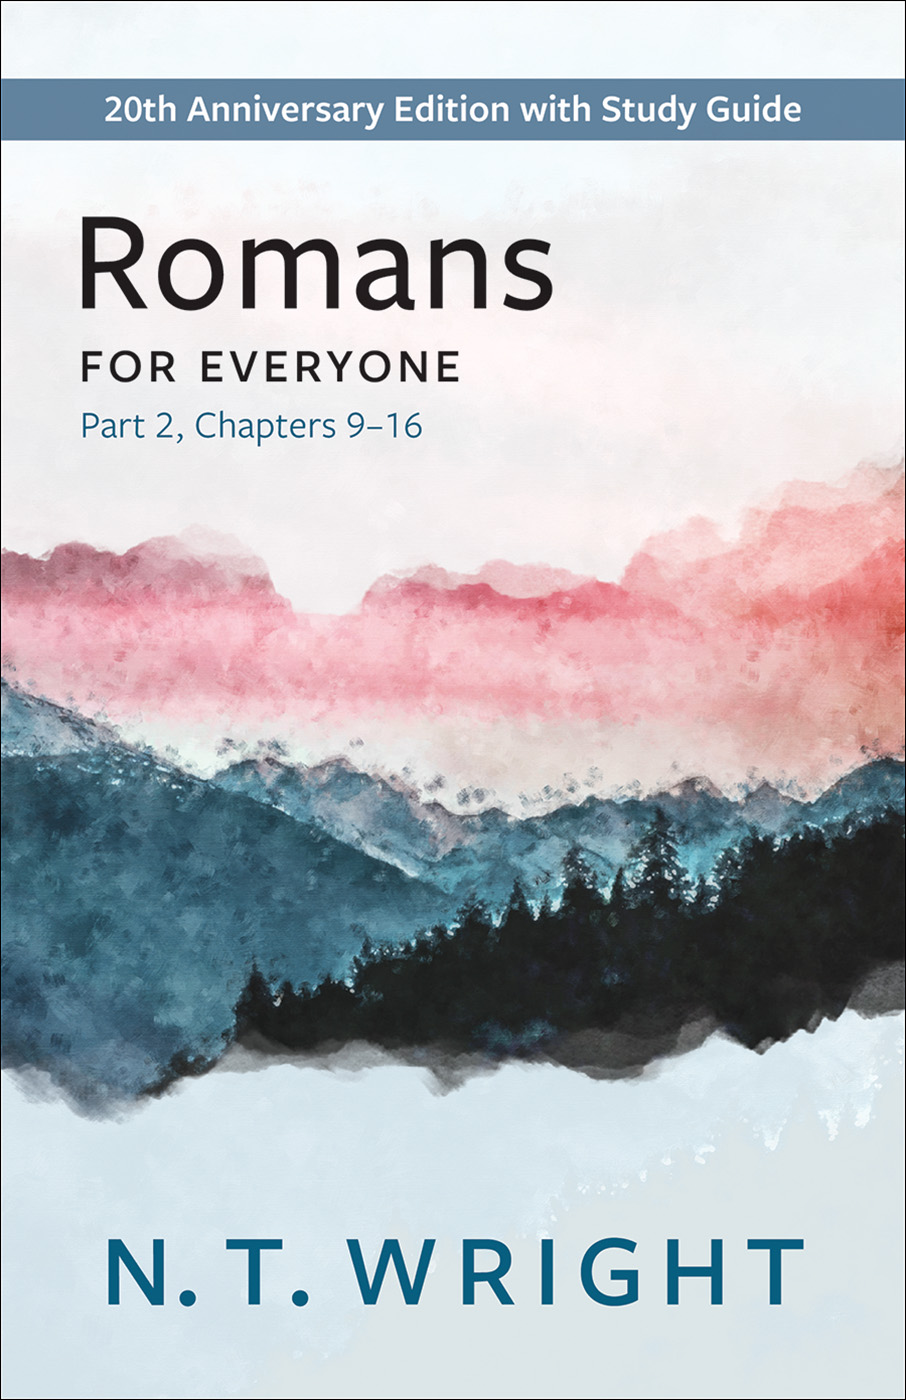 Romans for Everyone, Part 2